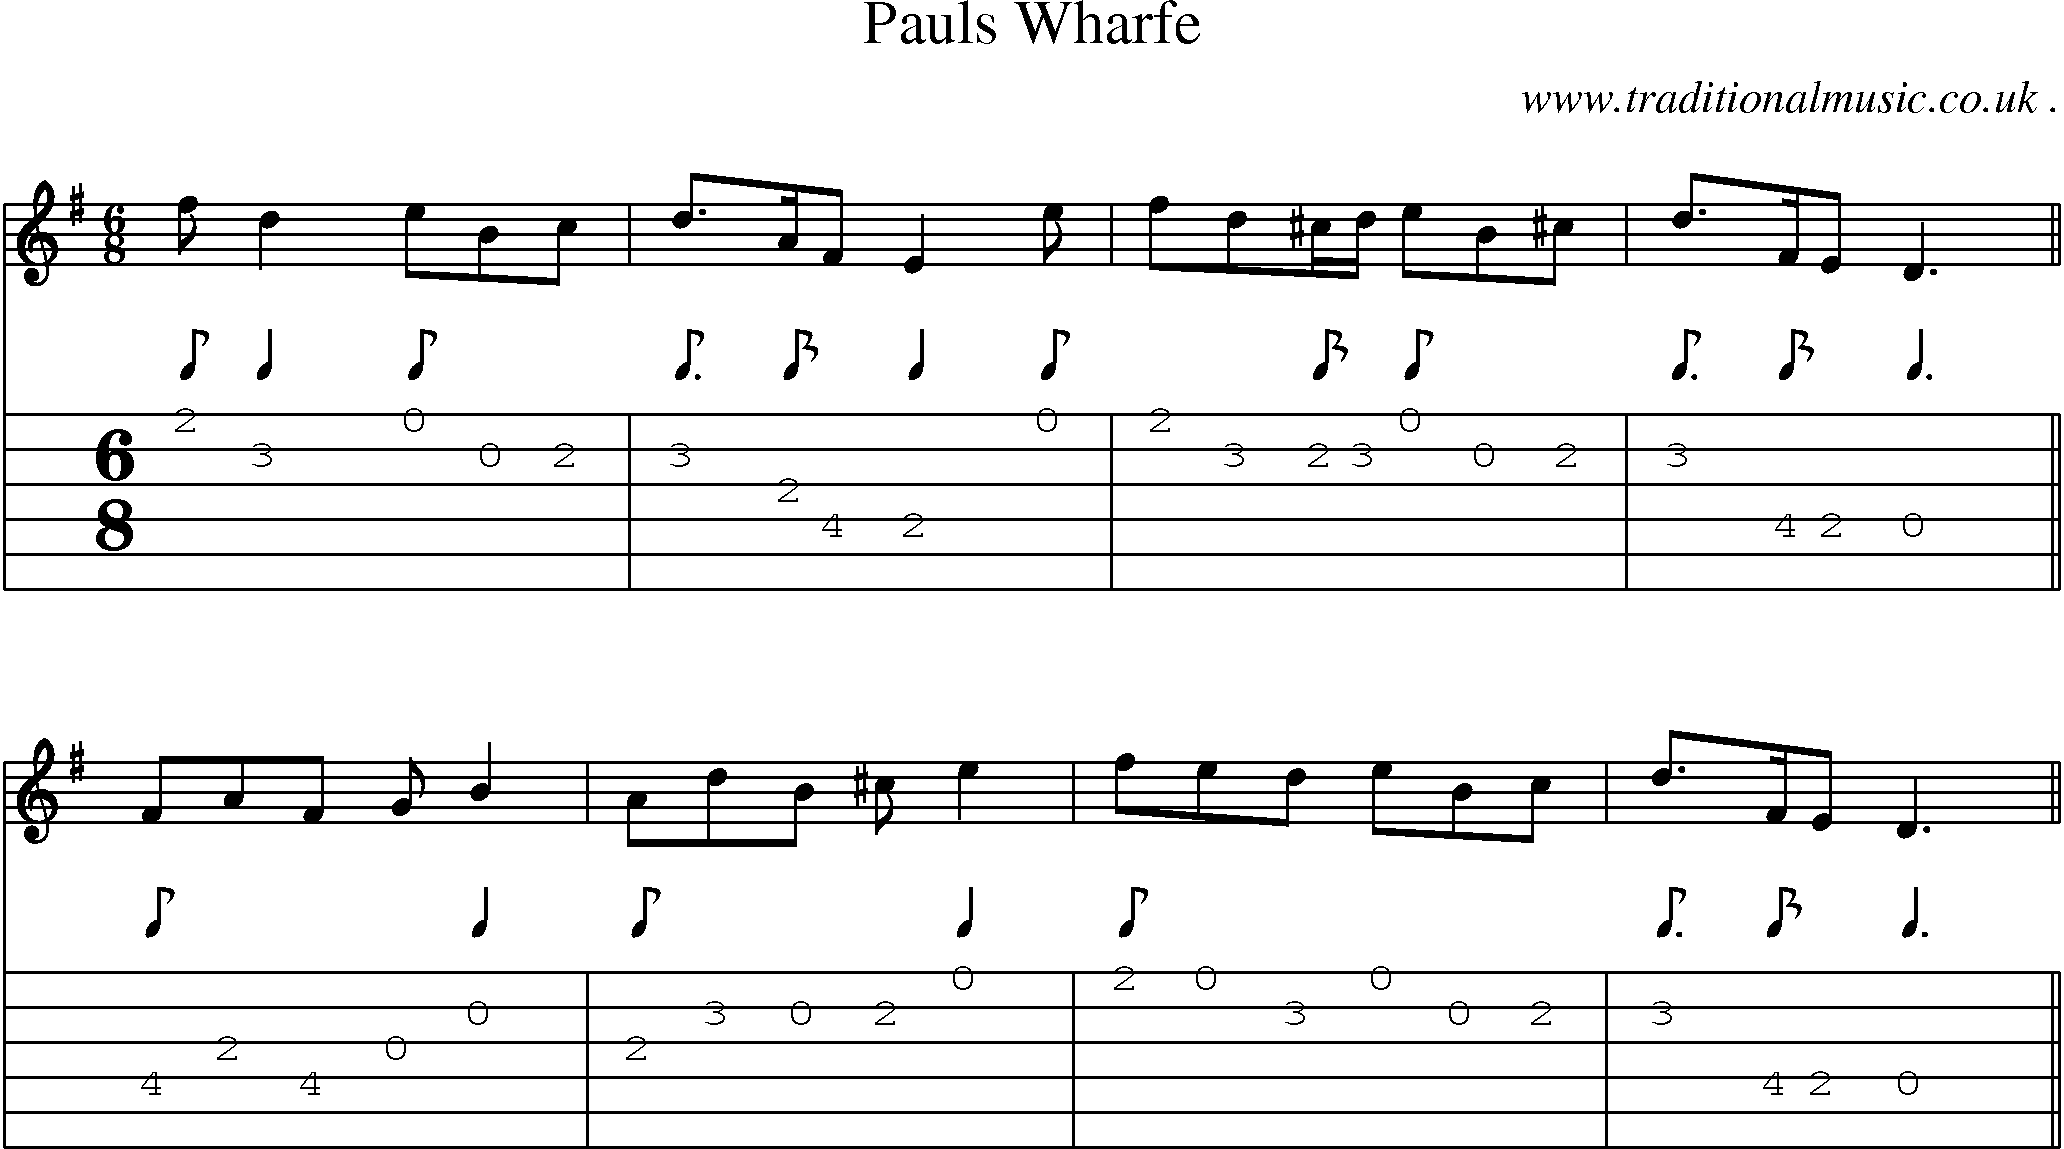 Sheet-music  score, Chords and Guitar Tabs for Pauls Wharfe